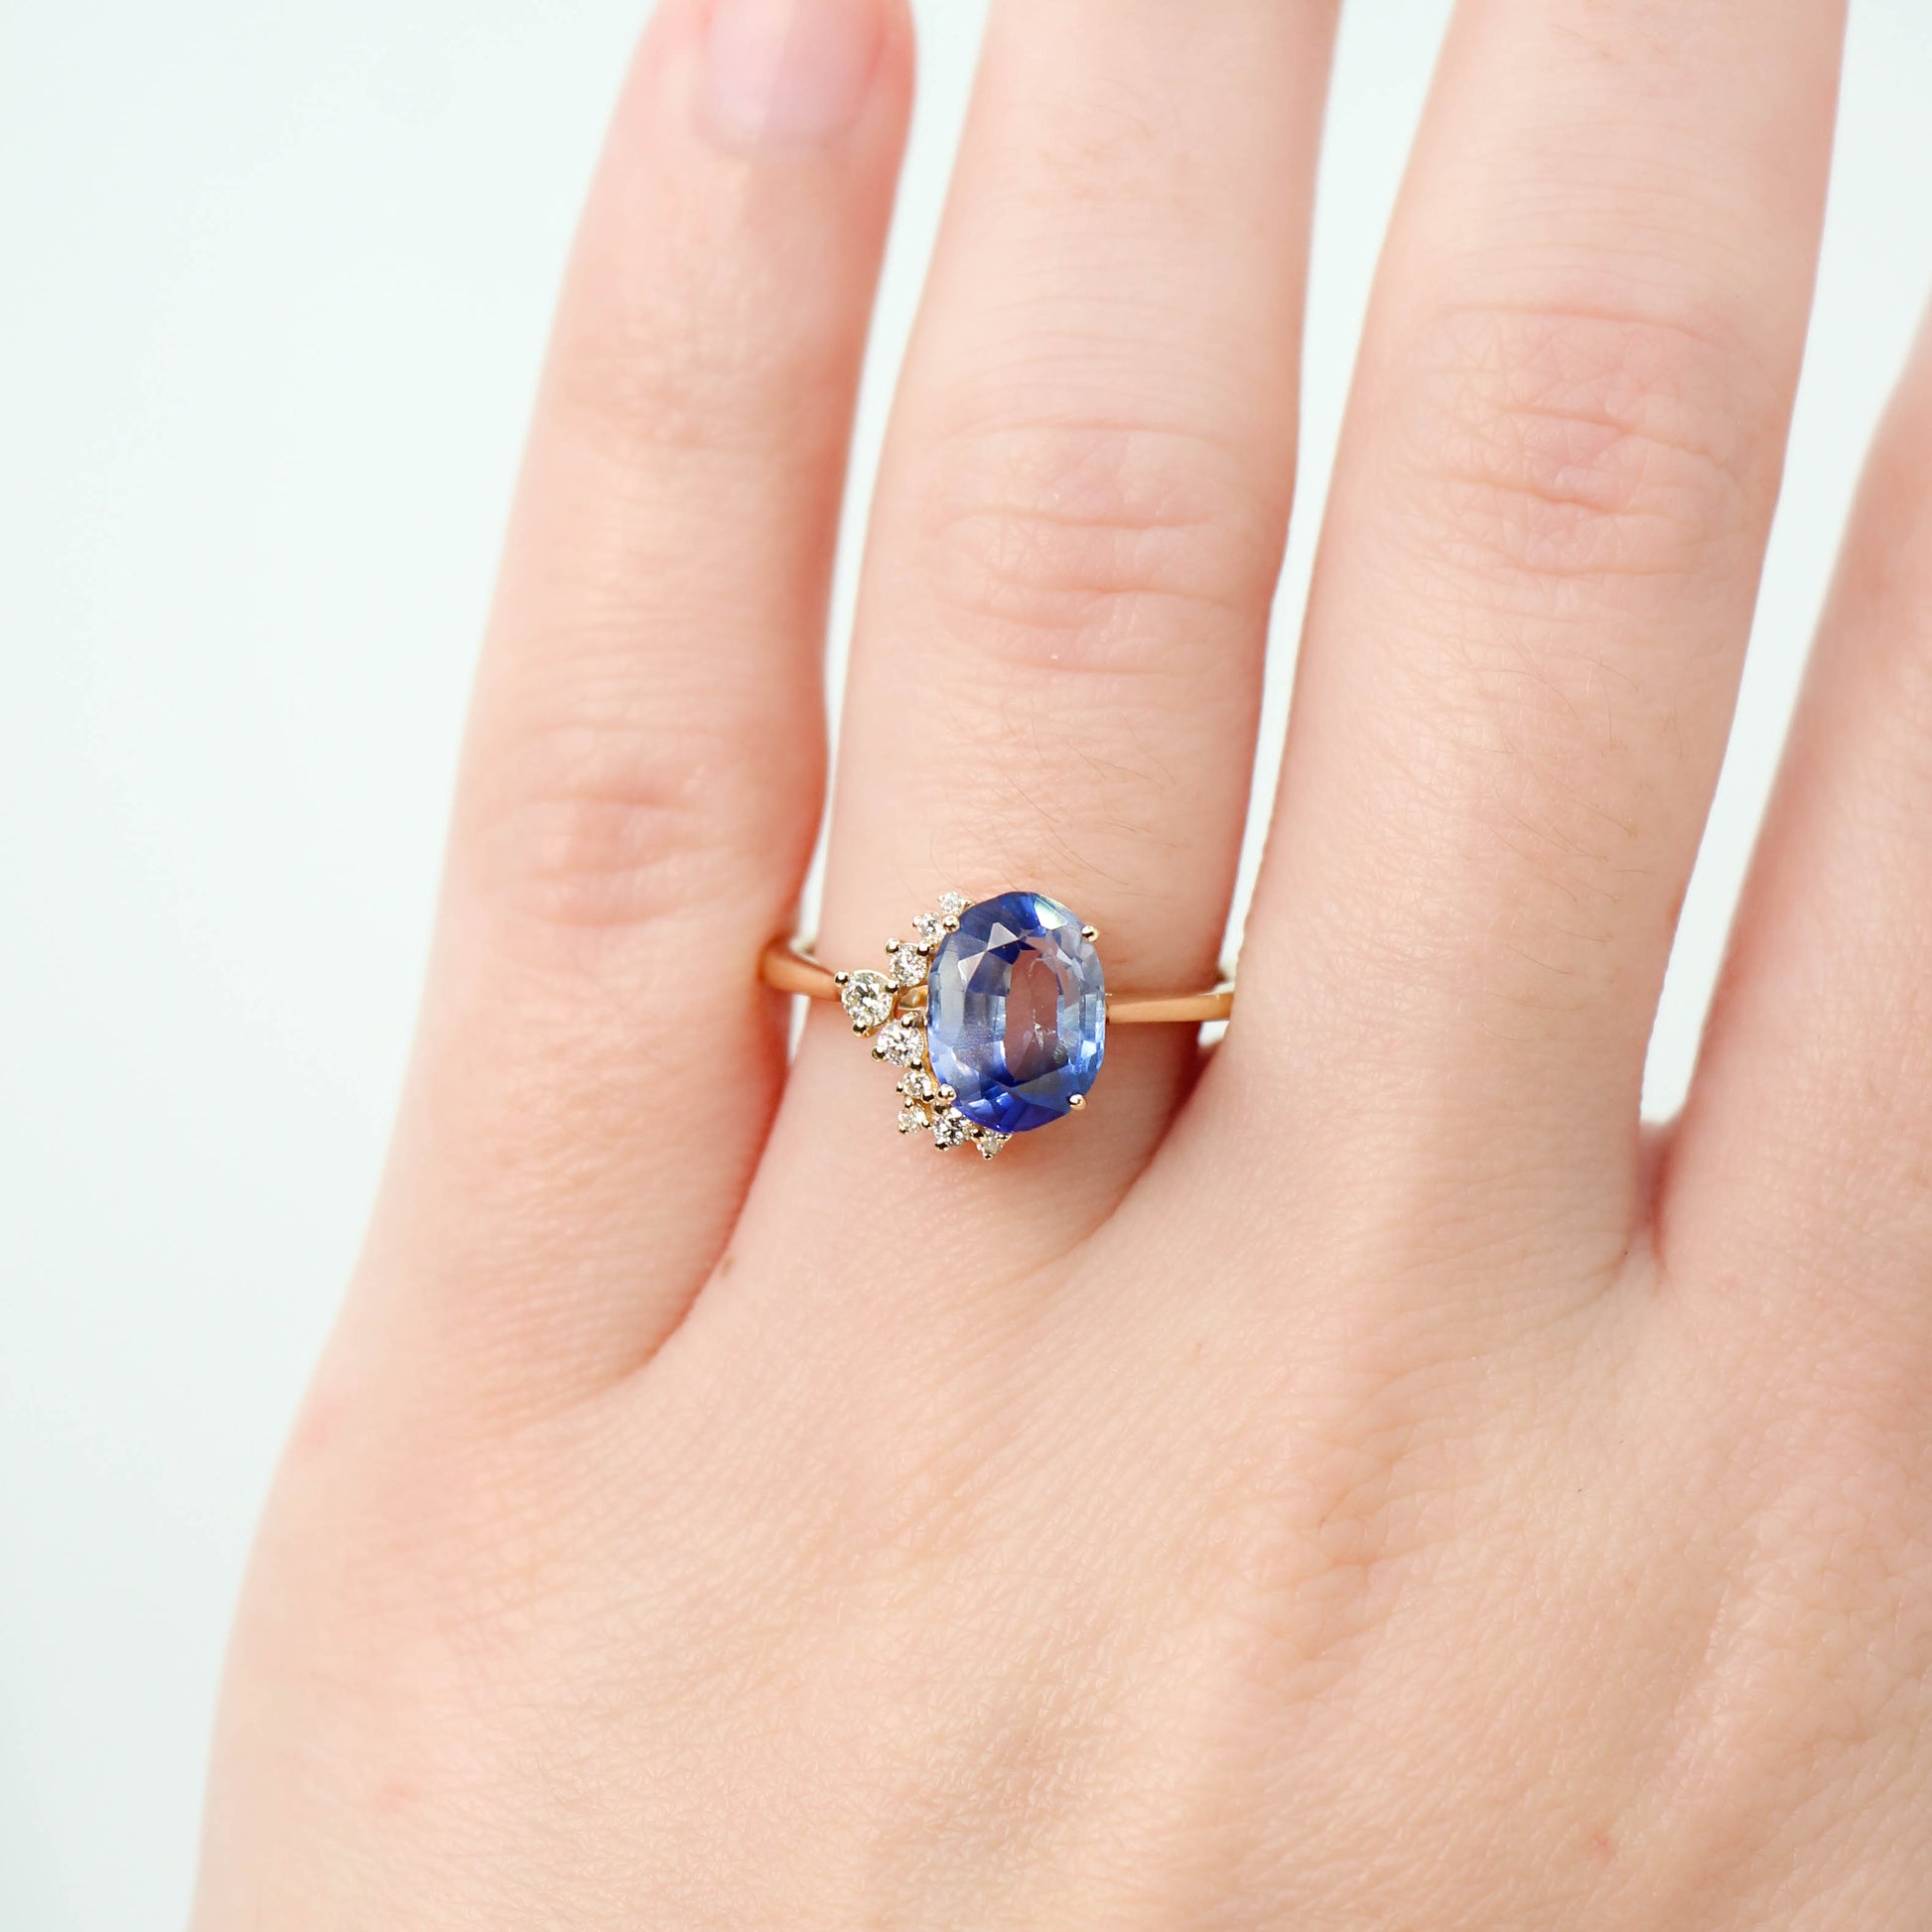 Anila Ring with a 2.63 Carat Oval Blue Sapphire and White Accent Diamonds in 14k Yellow Gold - Ready to Size and Ship - Midwinter Co. Alternative Bridal Rings and Modern Fine Jewelry